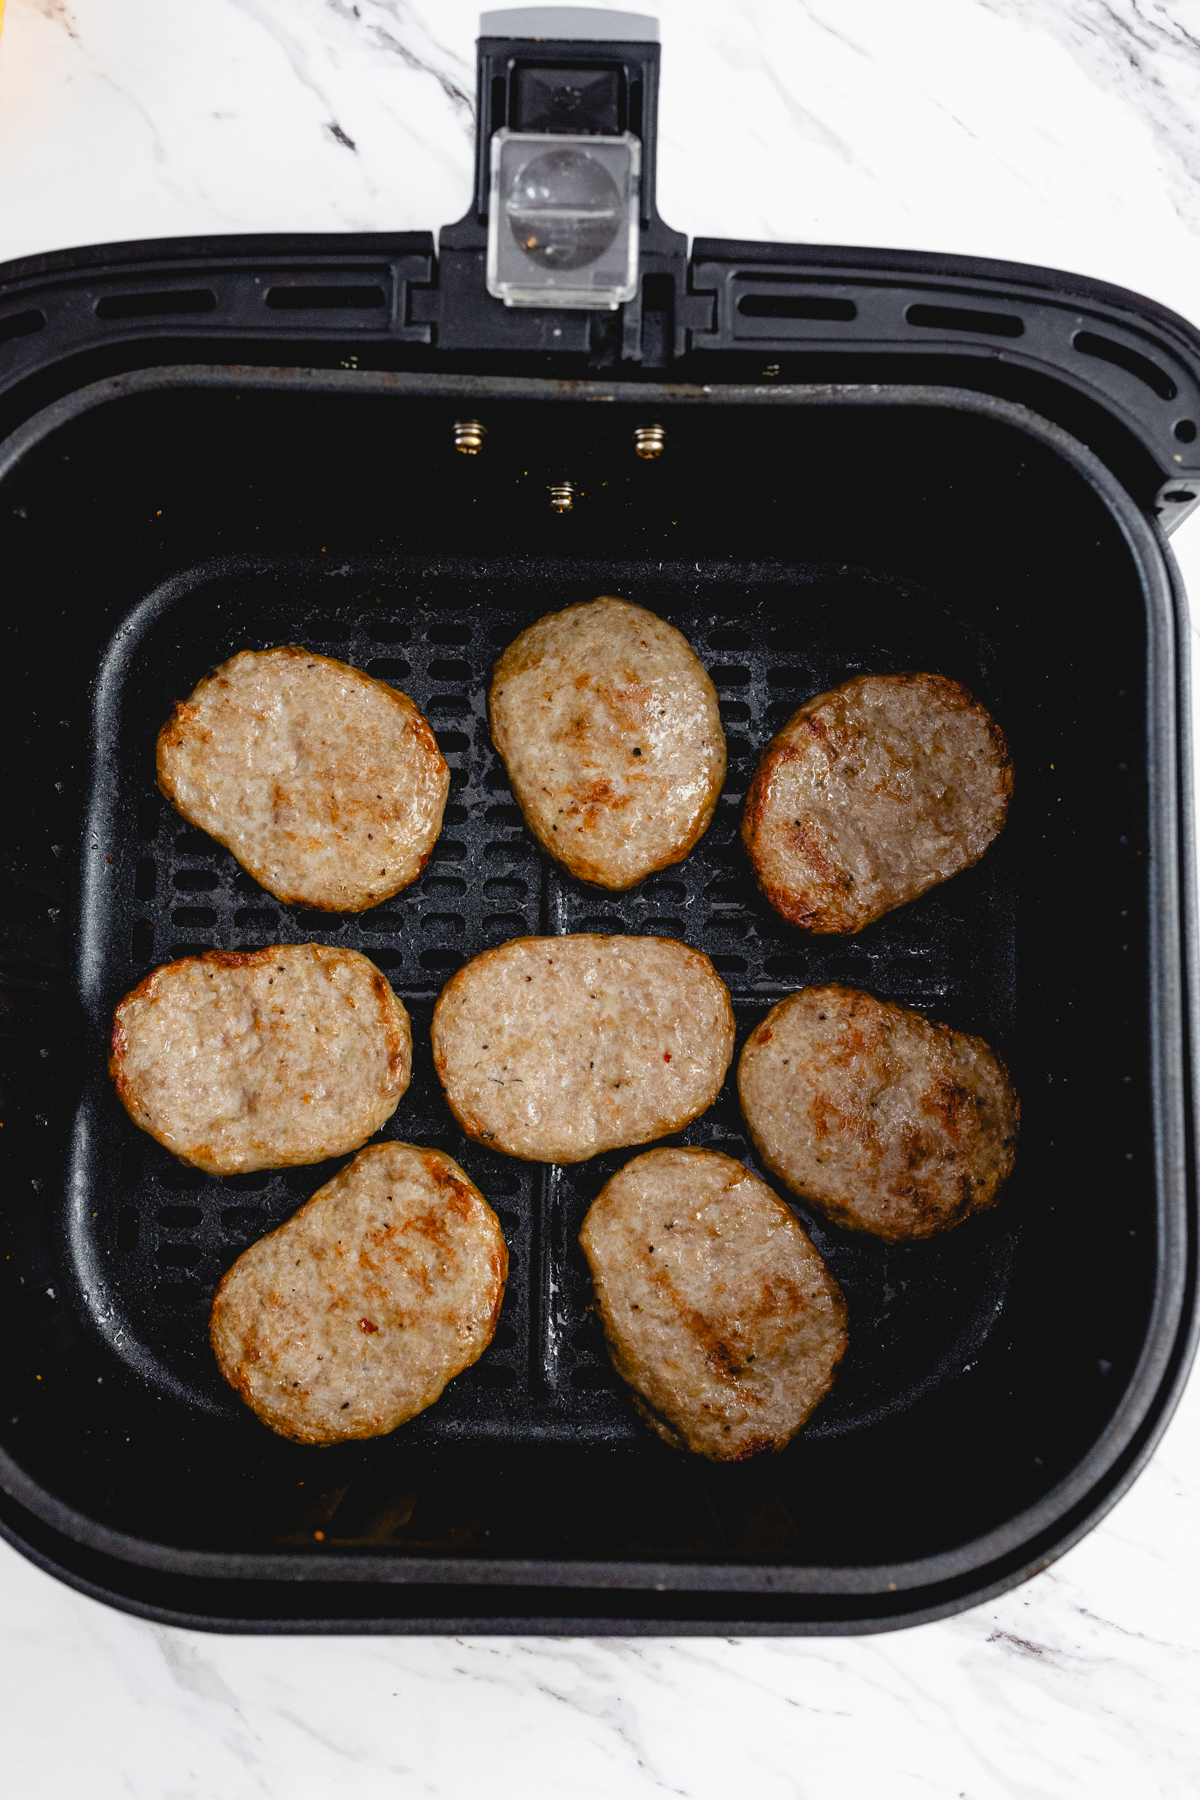 Top view of cooked sausage patties in the basket of an open air fryer.